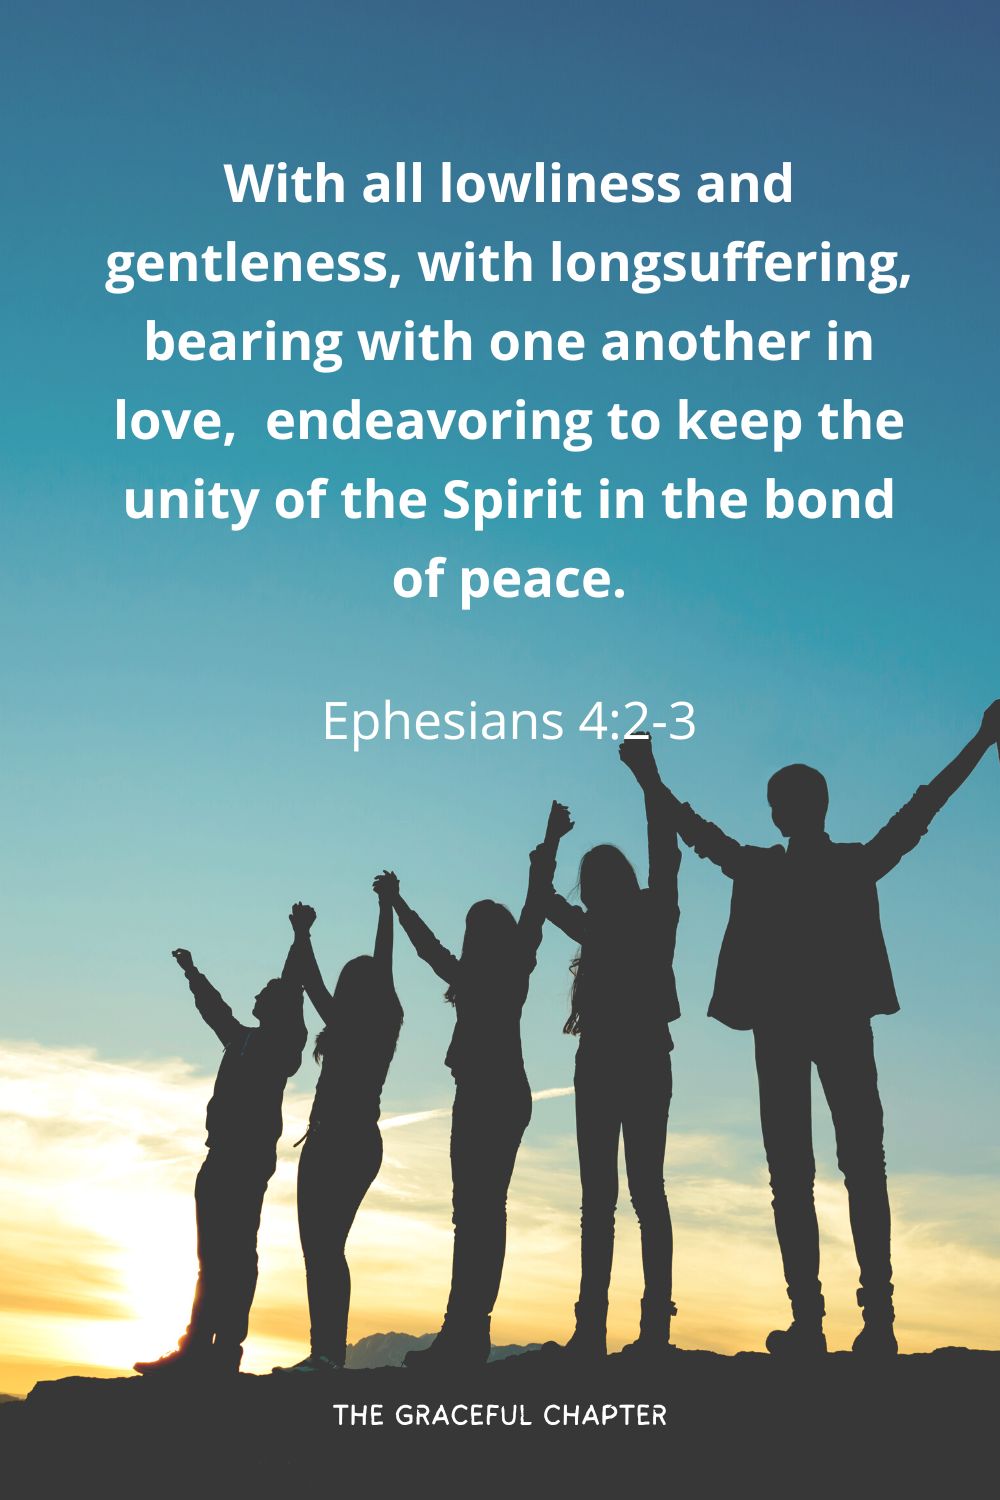 With all lowliness and gentleness, with longsuffering, bearing with one another in love,  endeavoring to keep the unity of the Spirit in the bond of peace.